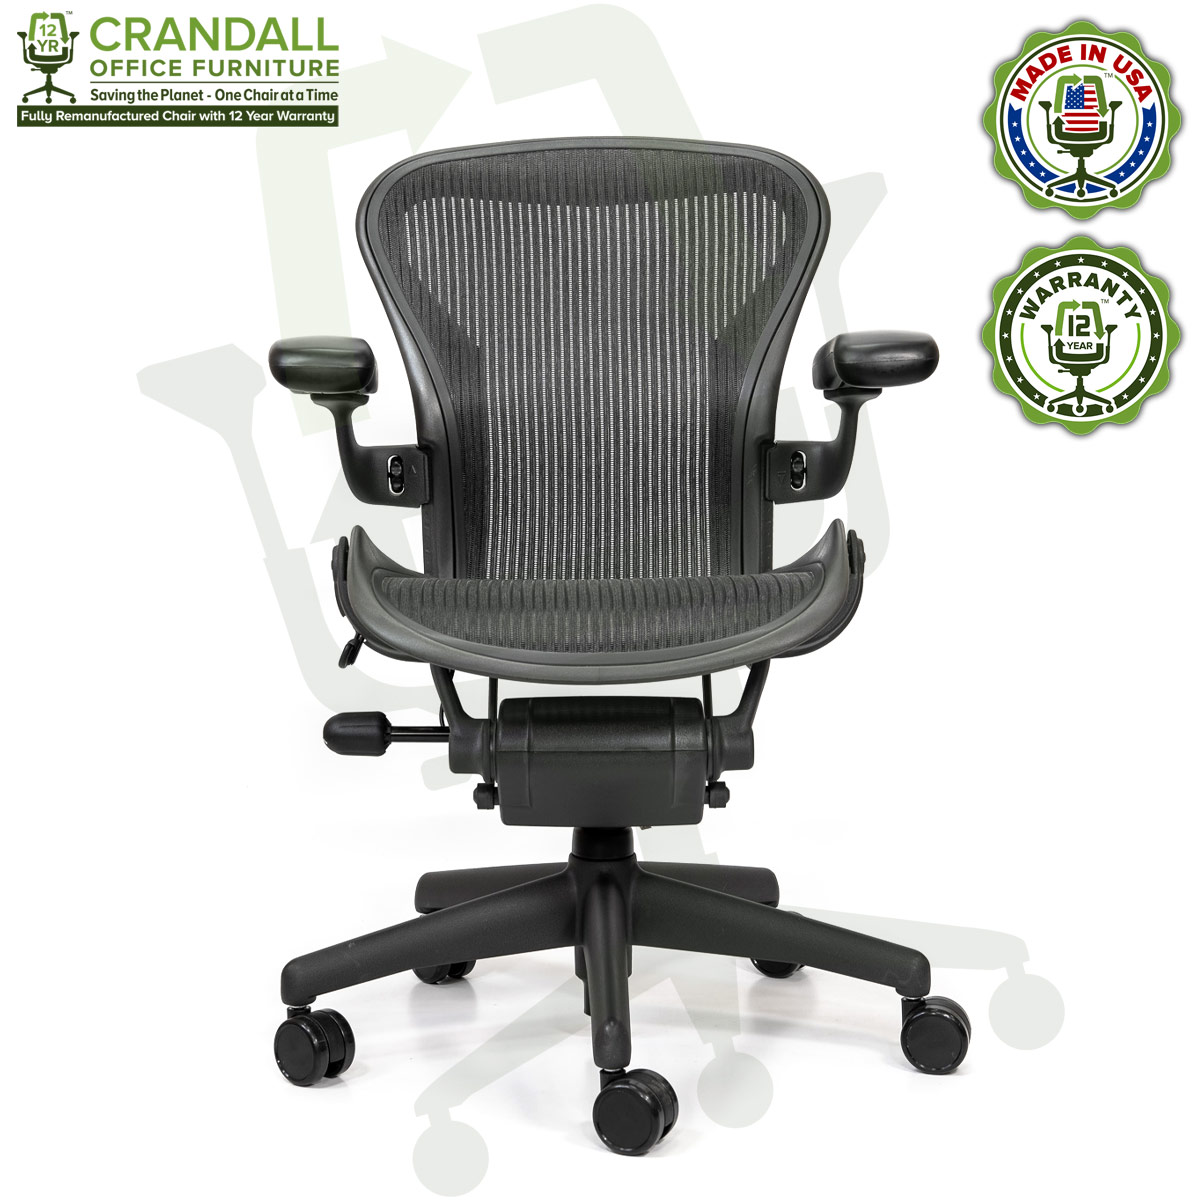 Crandall Office Refurbished Herman Miller Aeron Chair - Size A - 0001